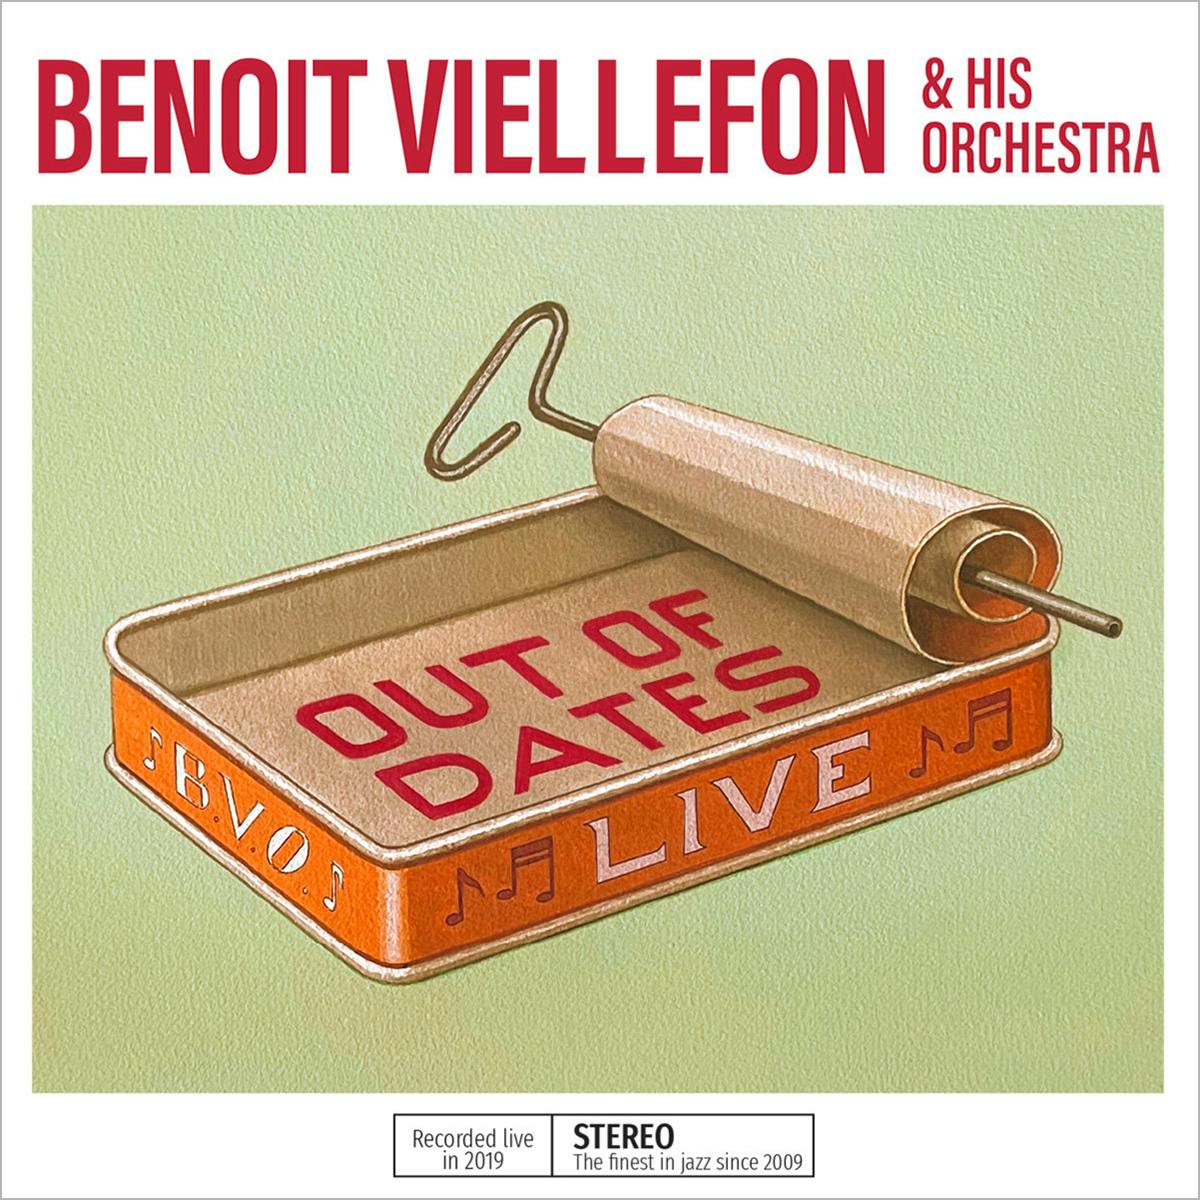 Benoit Viellefon and His Orchestra - New album OUT OF DATES  livee